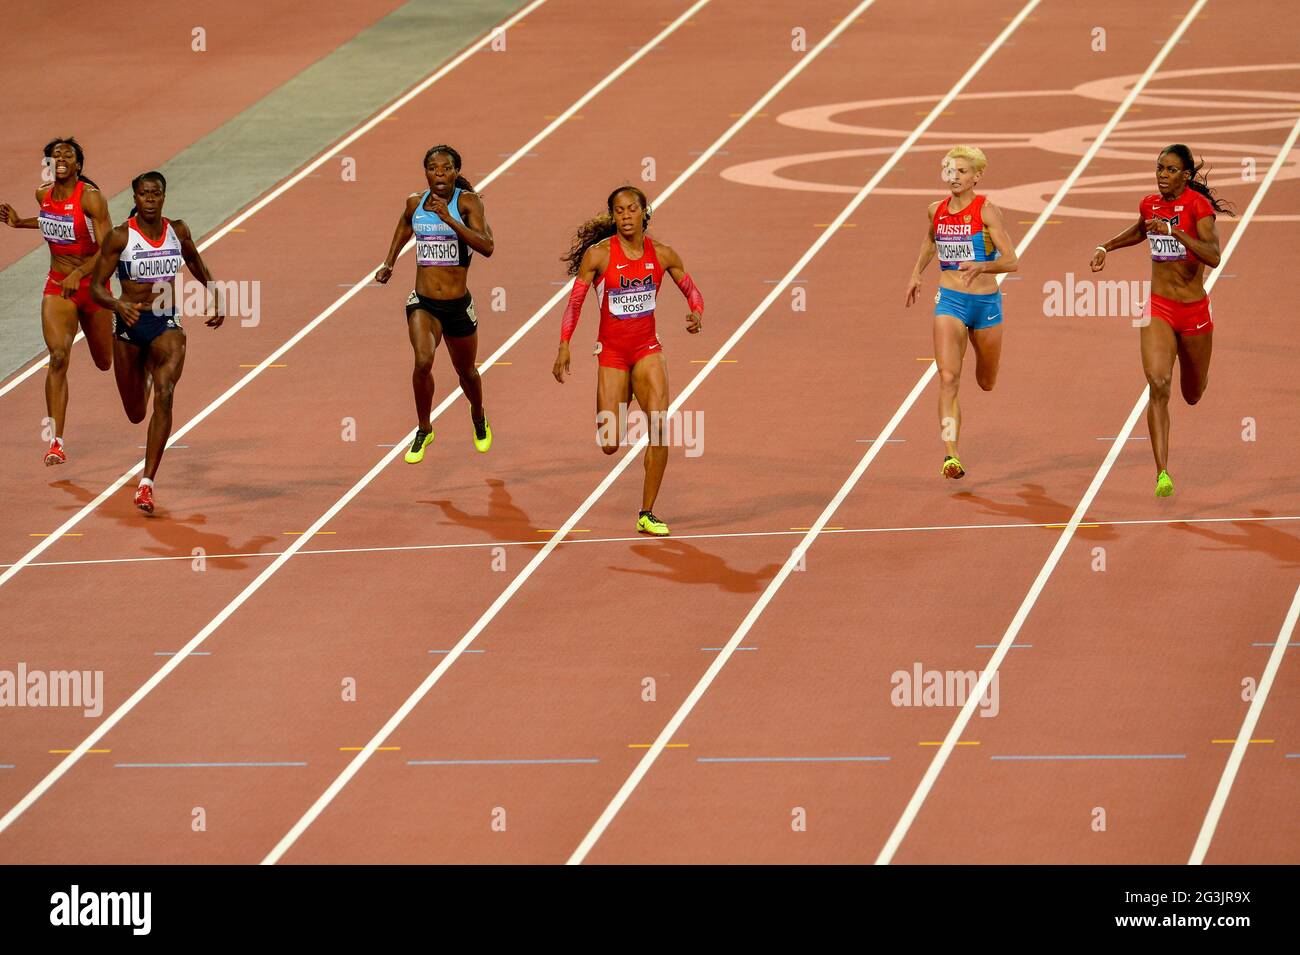 LONDON, ENGLAND - AUGUST 5, Francena McCorory of the United States, Christine Ohuruogu of Great Britain, Amantle Montsho of Botswana and Sanya Richards-Ross of the United States, Antonina Krivoshapka of Russia and  DeeDee Trotter of the United States in the women’s 400m during the evening session of athletics at the Olympic Stadium  on August 5, 2012 in London, England Photo by Roger Sedres / Gallo Images Stock Photo